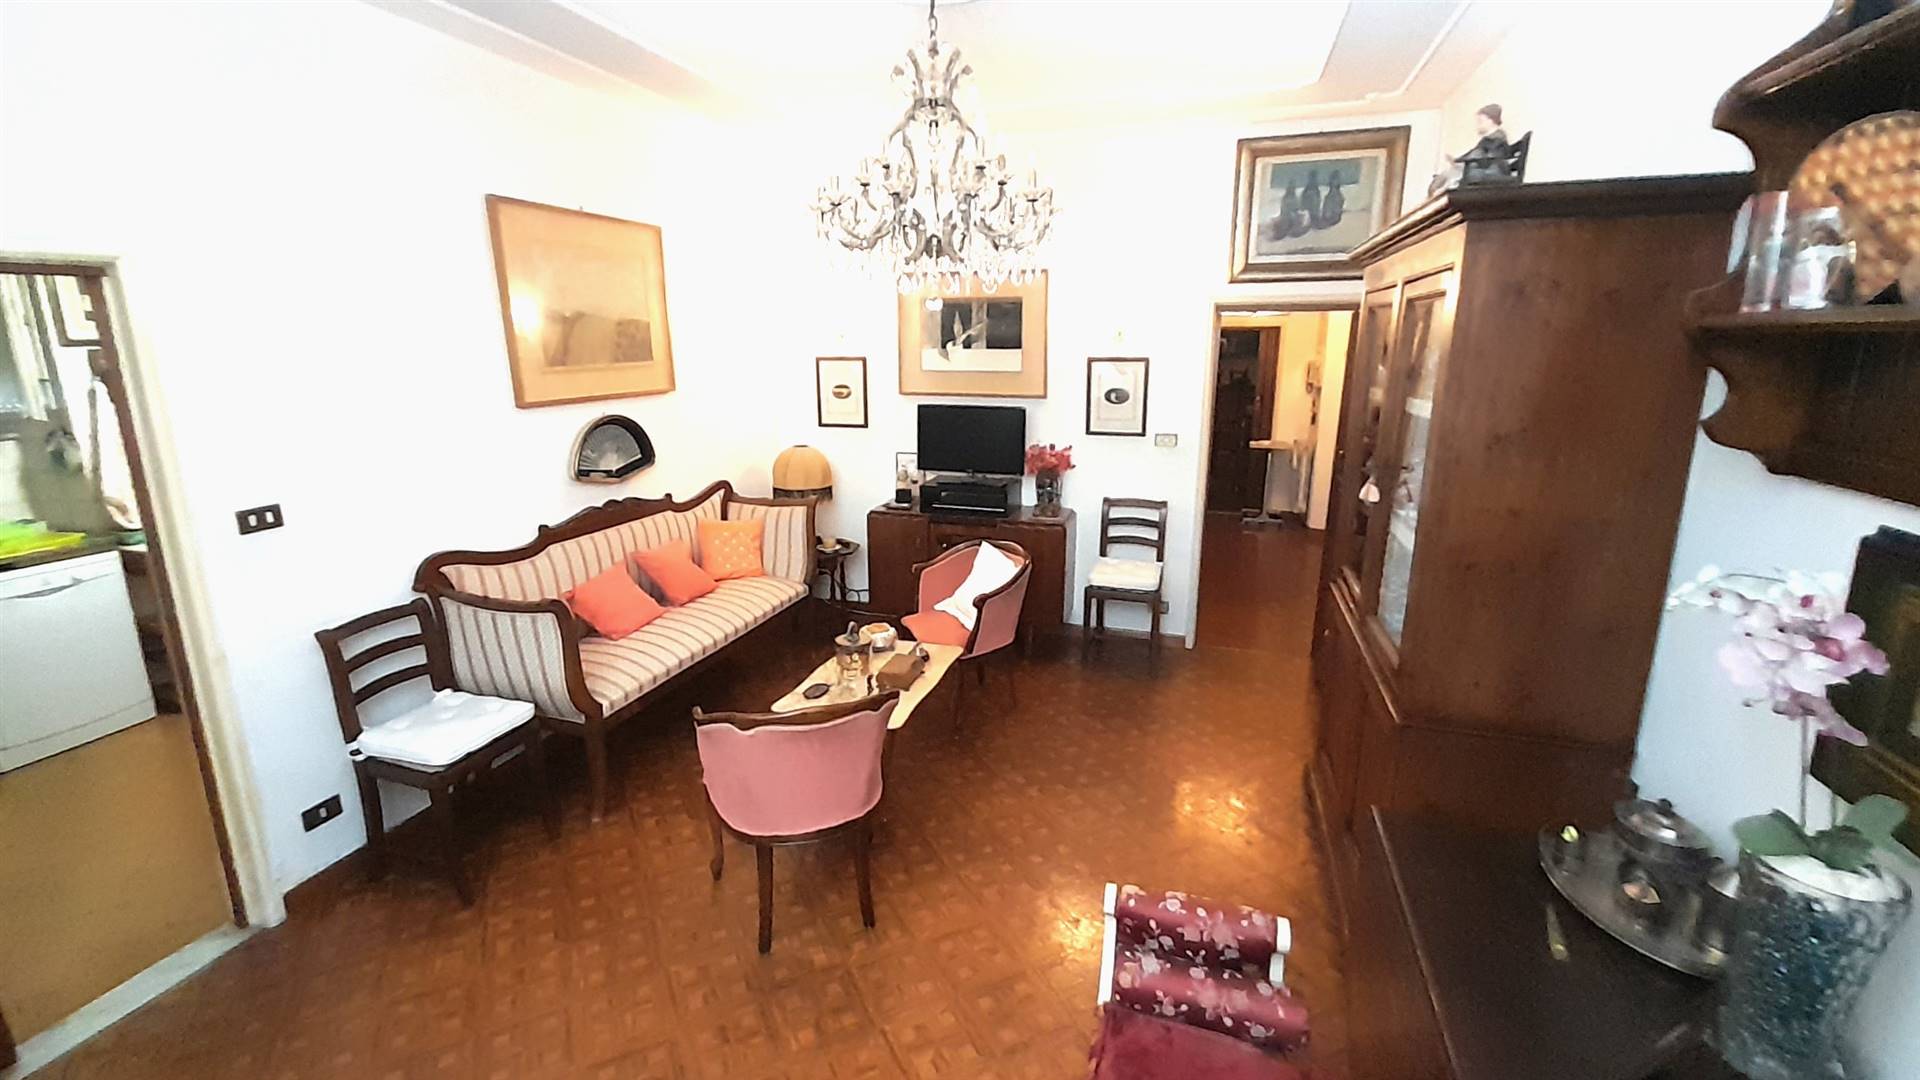 SANTO SPIRITO, FIRENZE, Apartment for sale of 75 Sq. mt., Good condition, Heating Individual heating system, Energetic class: G, Epi: 175 kwh/m2 year,